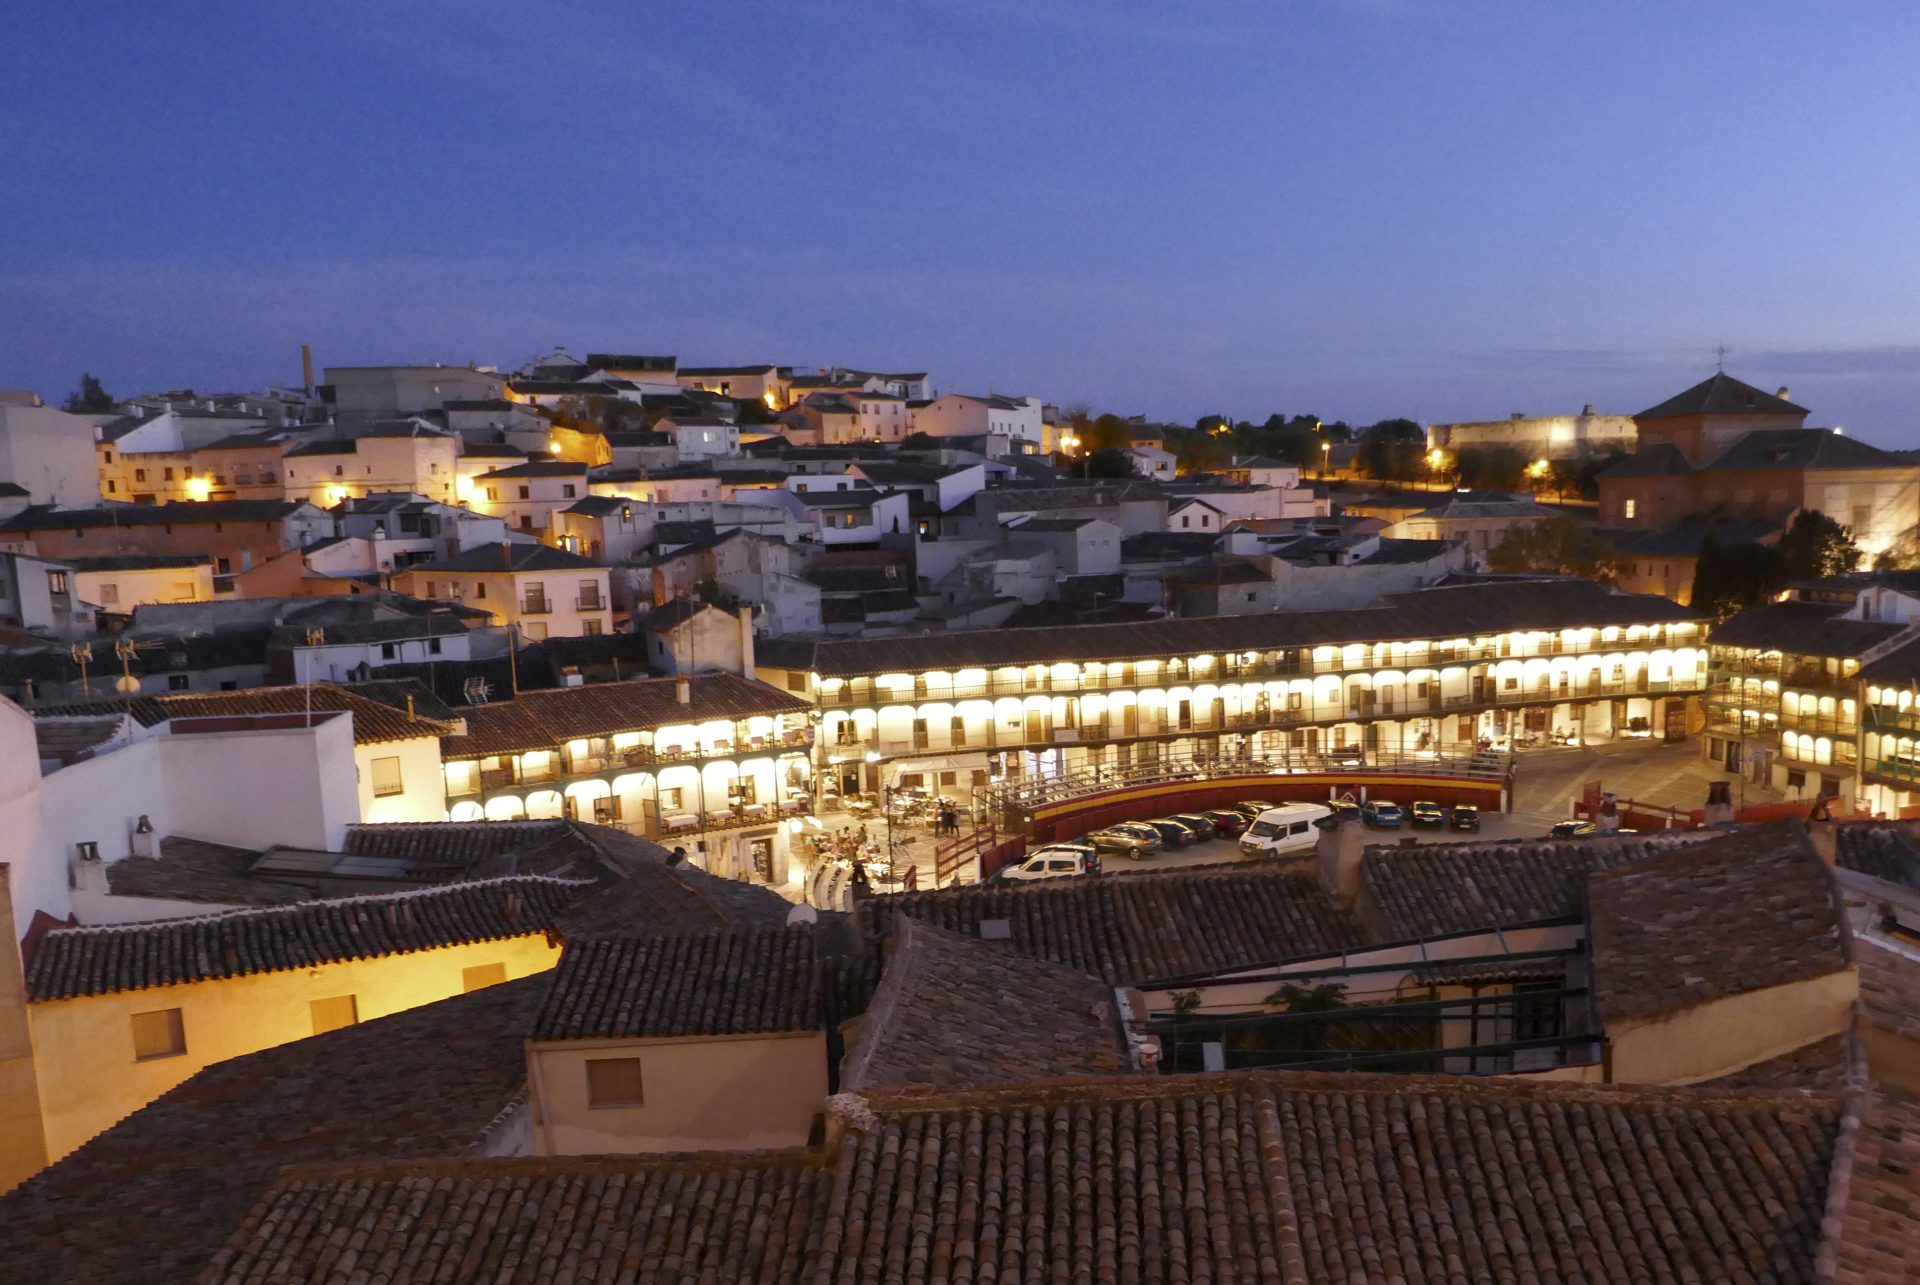 In the weekends Chinchón is filled with tourists for the Plaza Mayor with its restaurants or for one of the festivals.